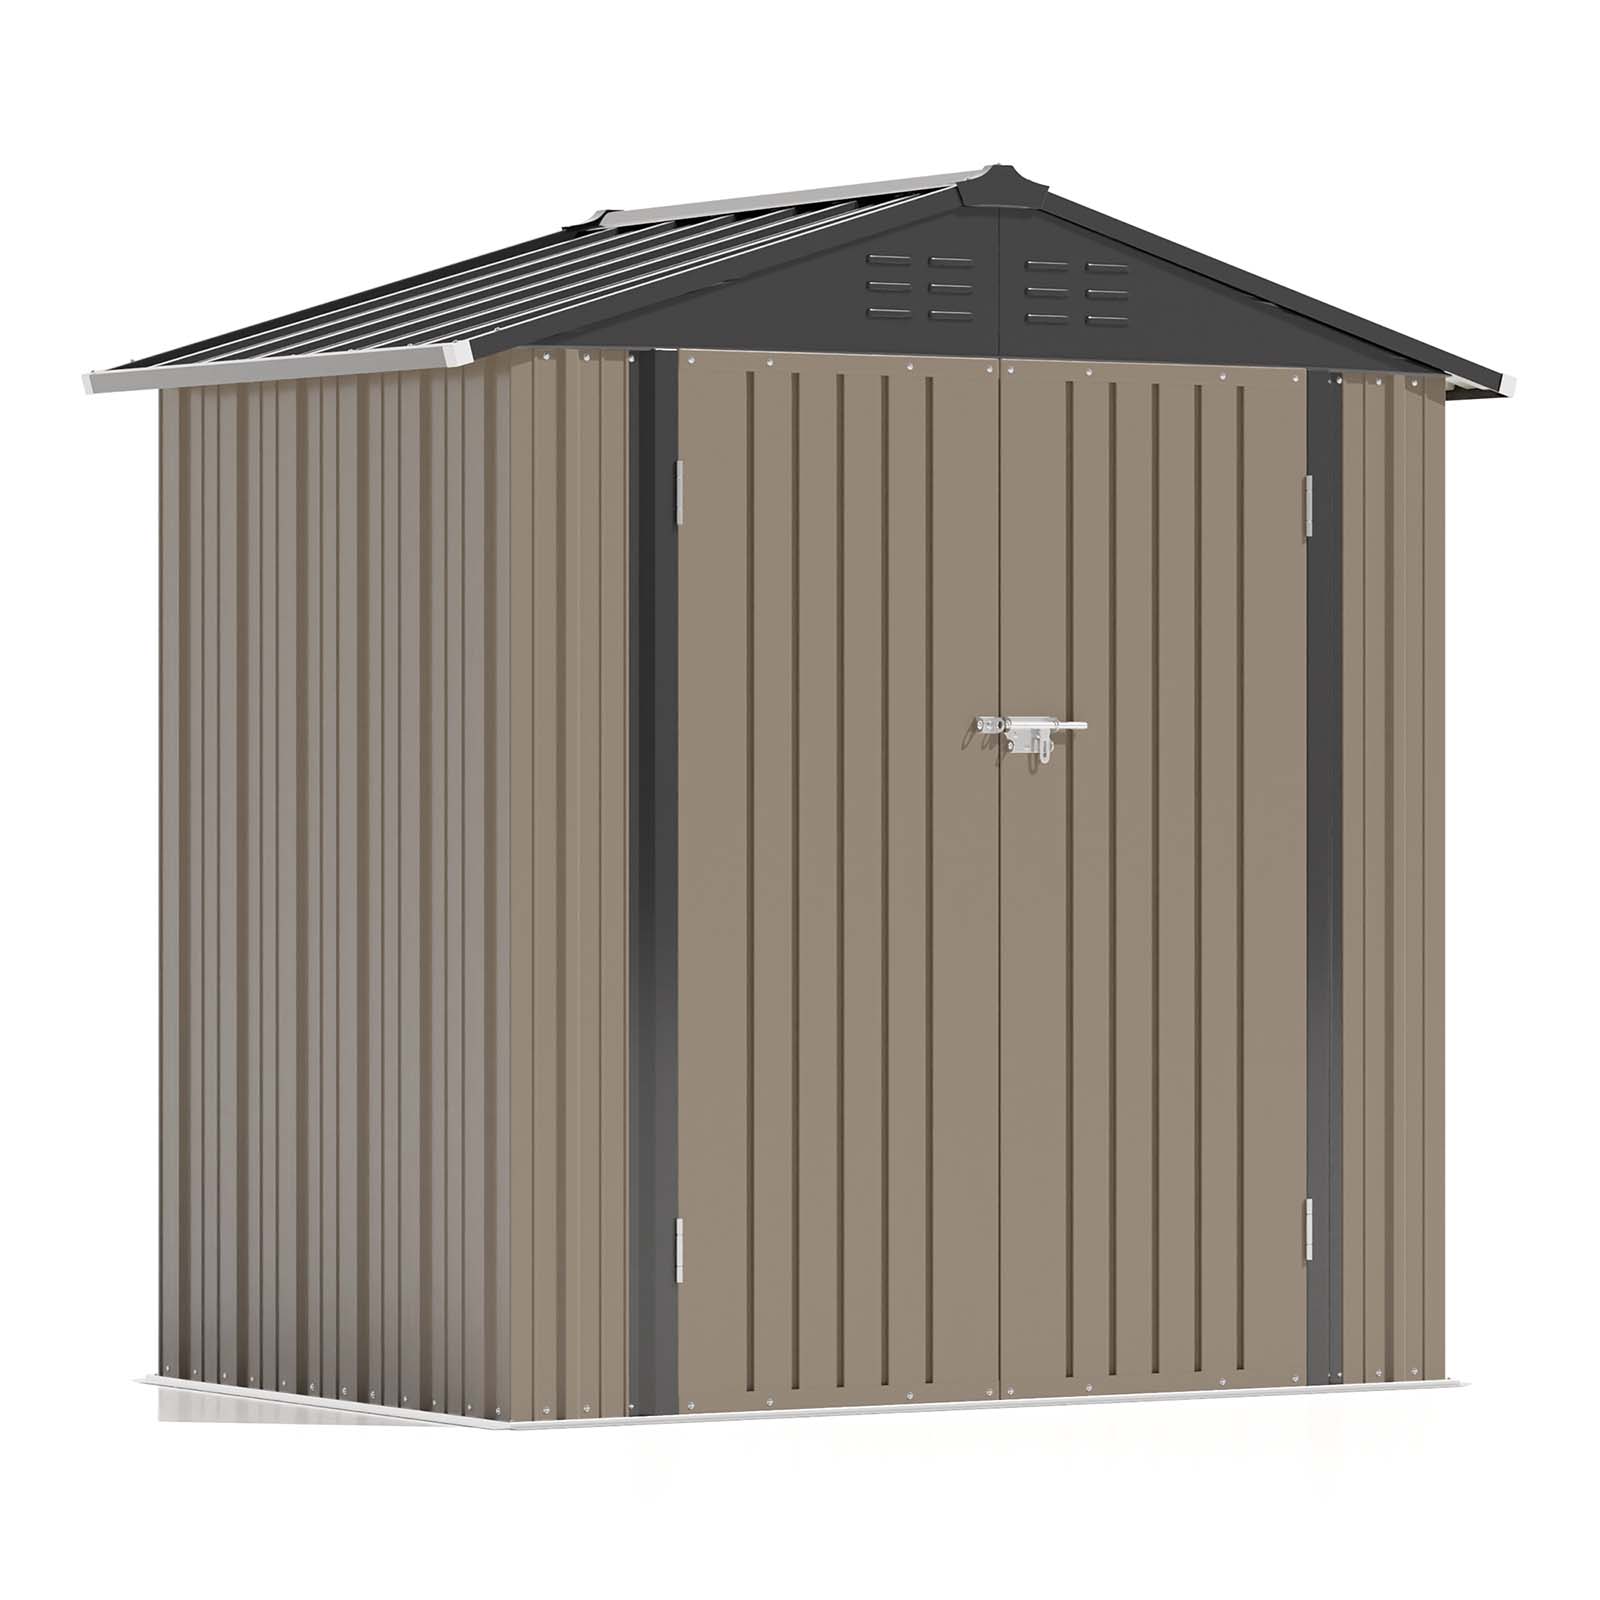 

6x4 Ft Outdoor Storage Shed, Garden Tool Storage Shed With Sloping Roof And Double Lockable Door, Outdoor Shed For Garden Backyard Patio Lawn, Brown